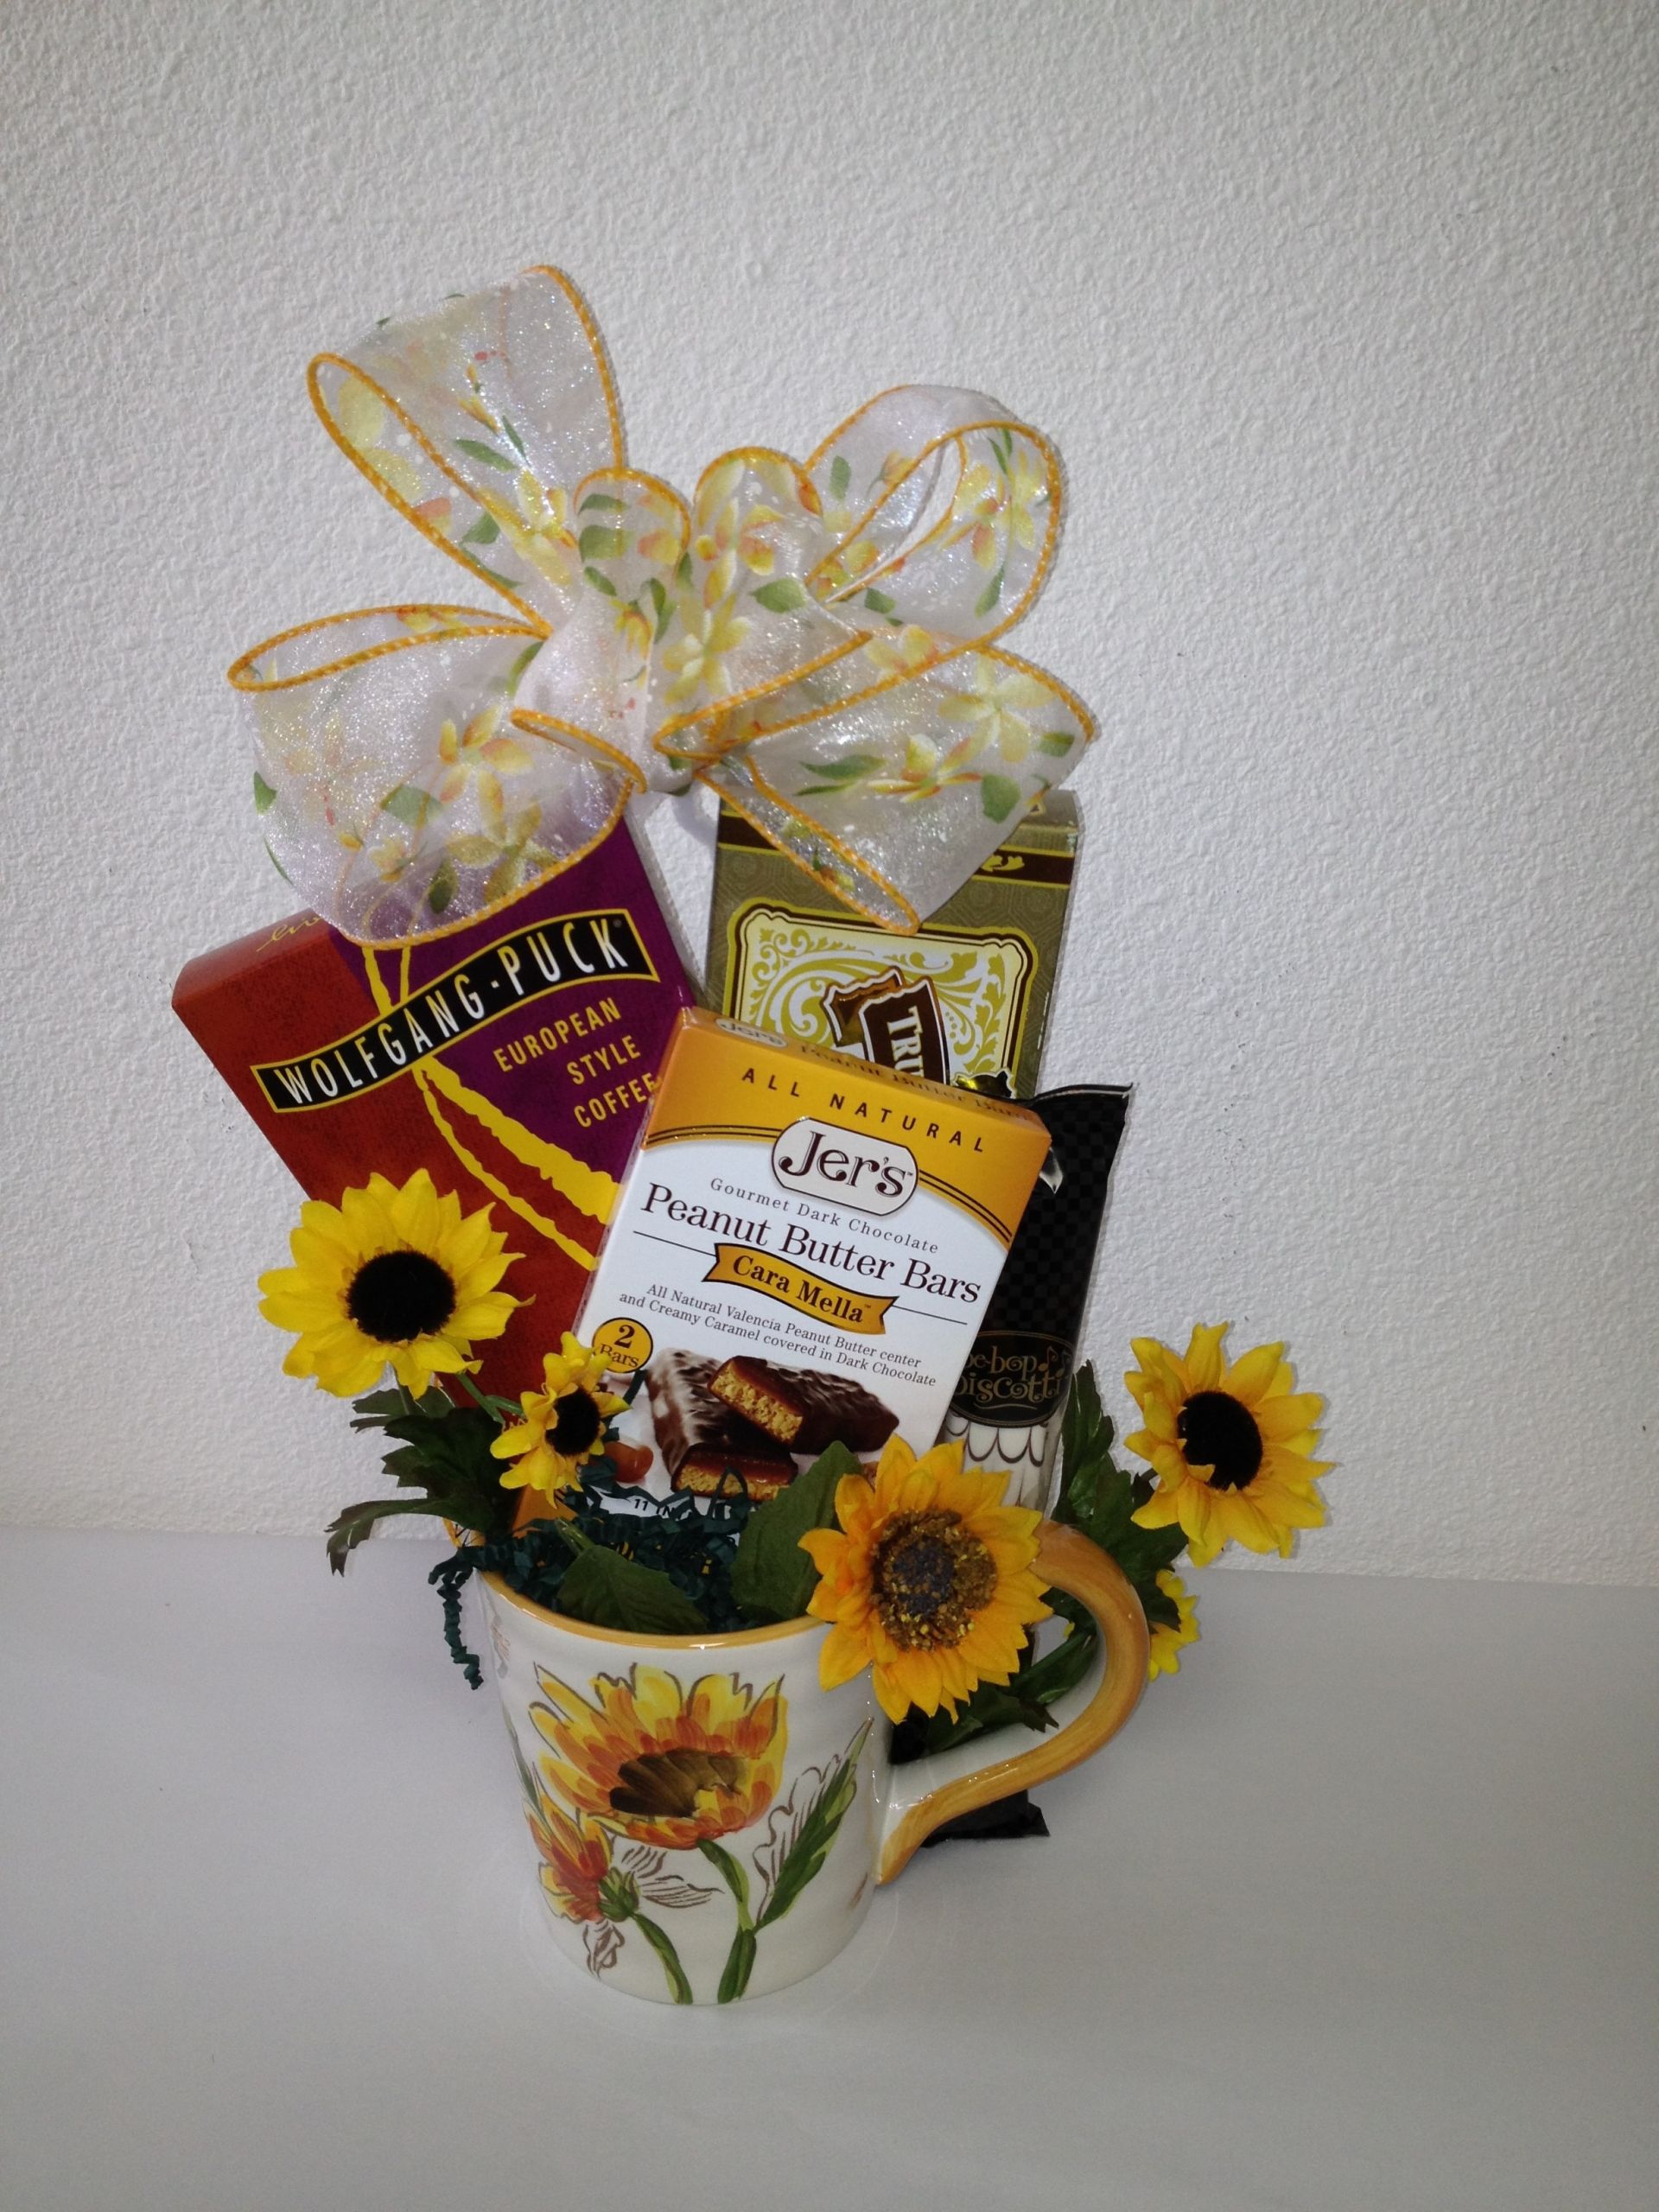 Inexpensive Gift Baskets Ideas
 Inexpensive Mother s Day Gift Baskets